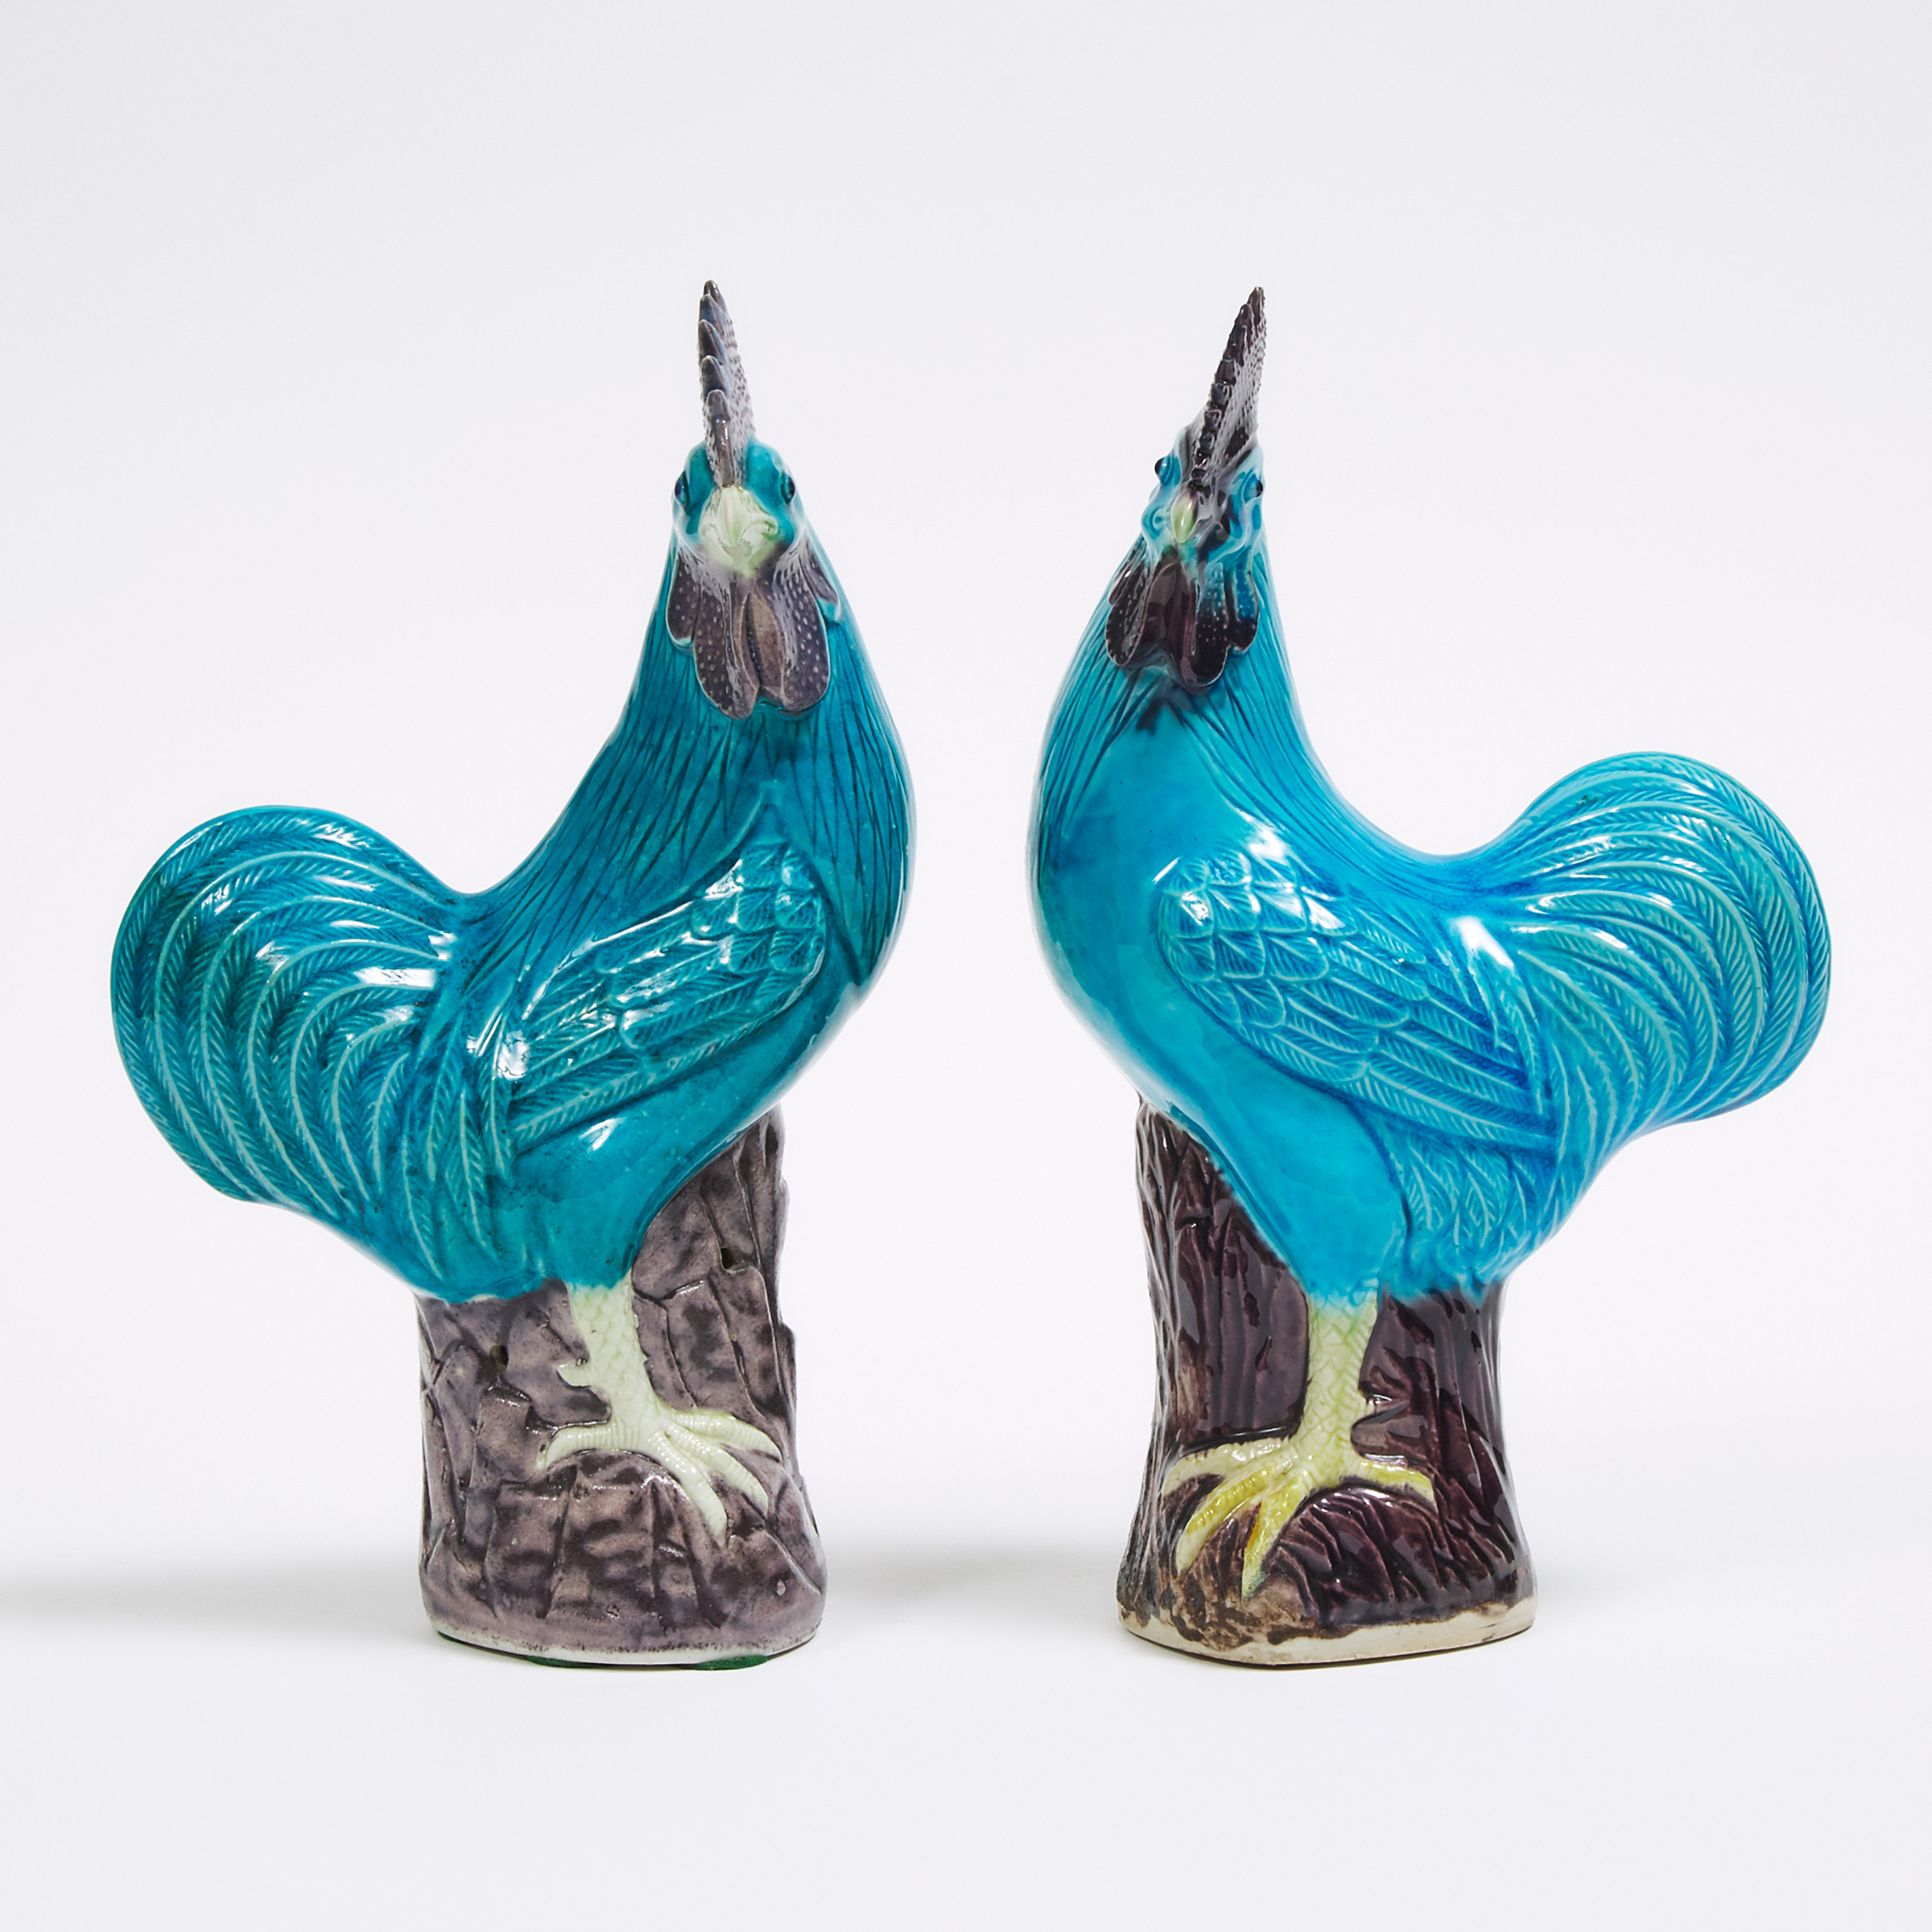 A Pair of Turquoise Glazed Porcelain Roosters, 19th Century or Later